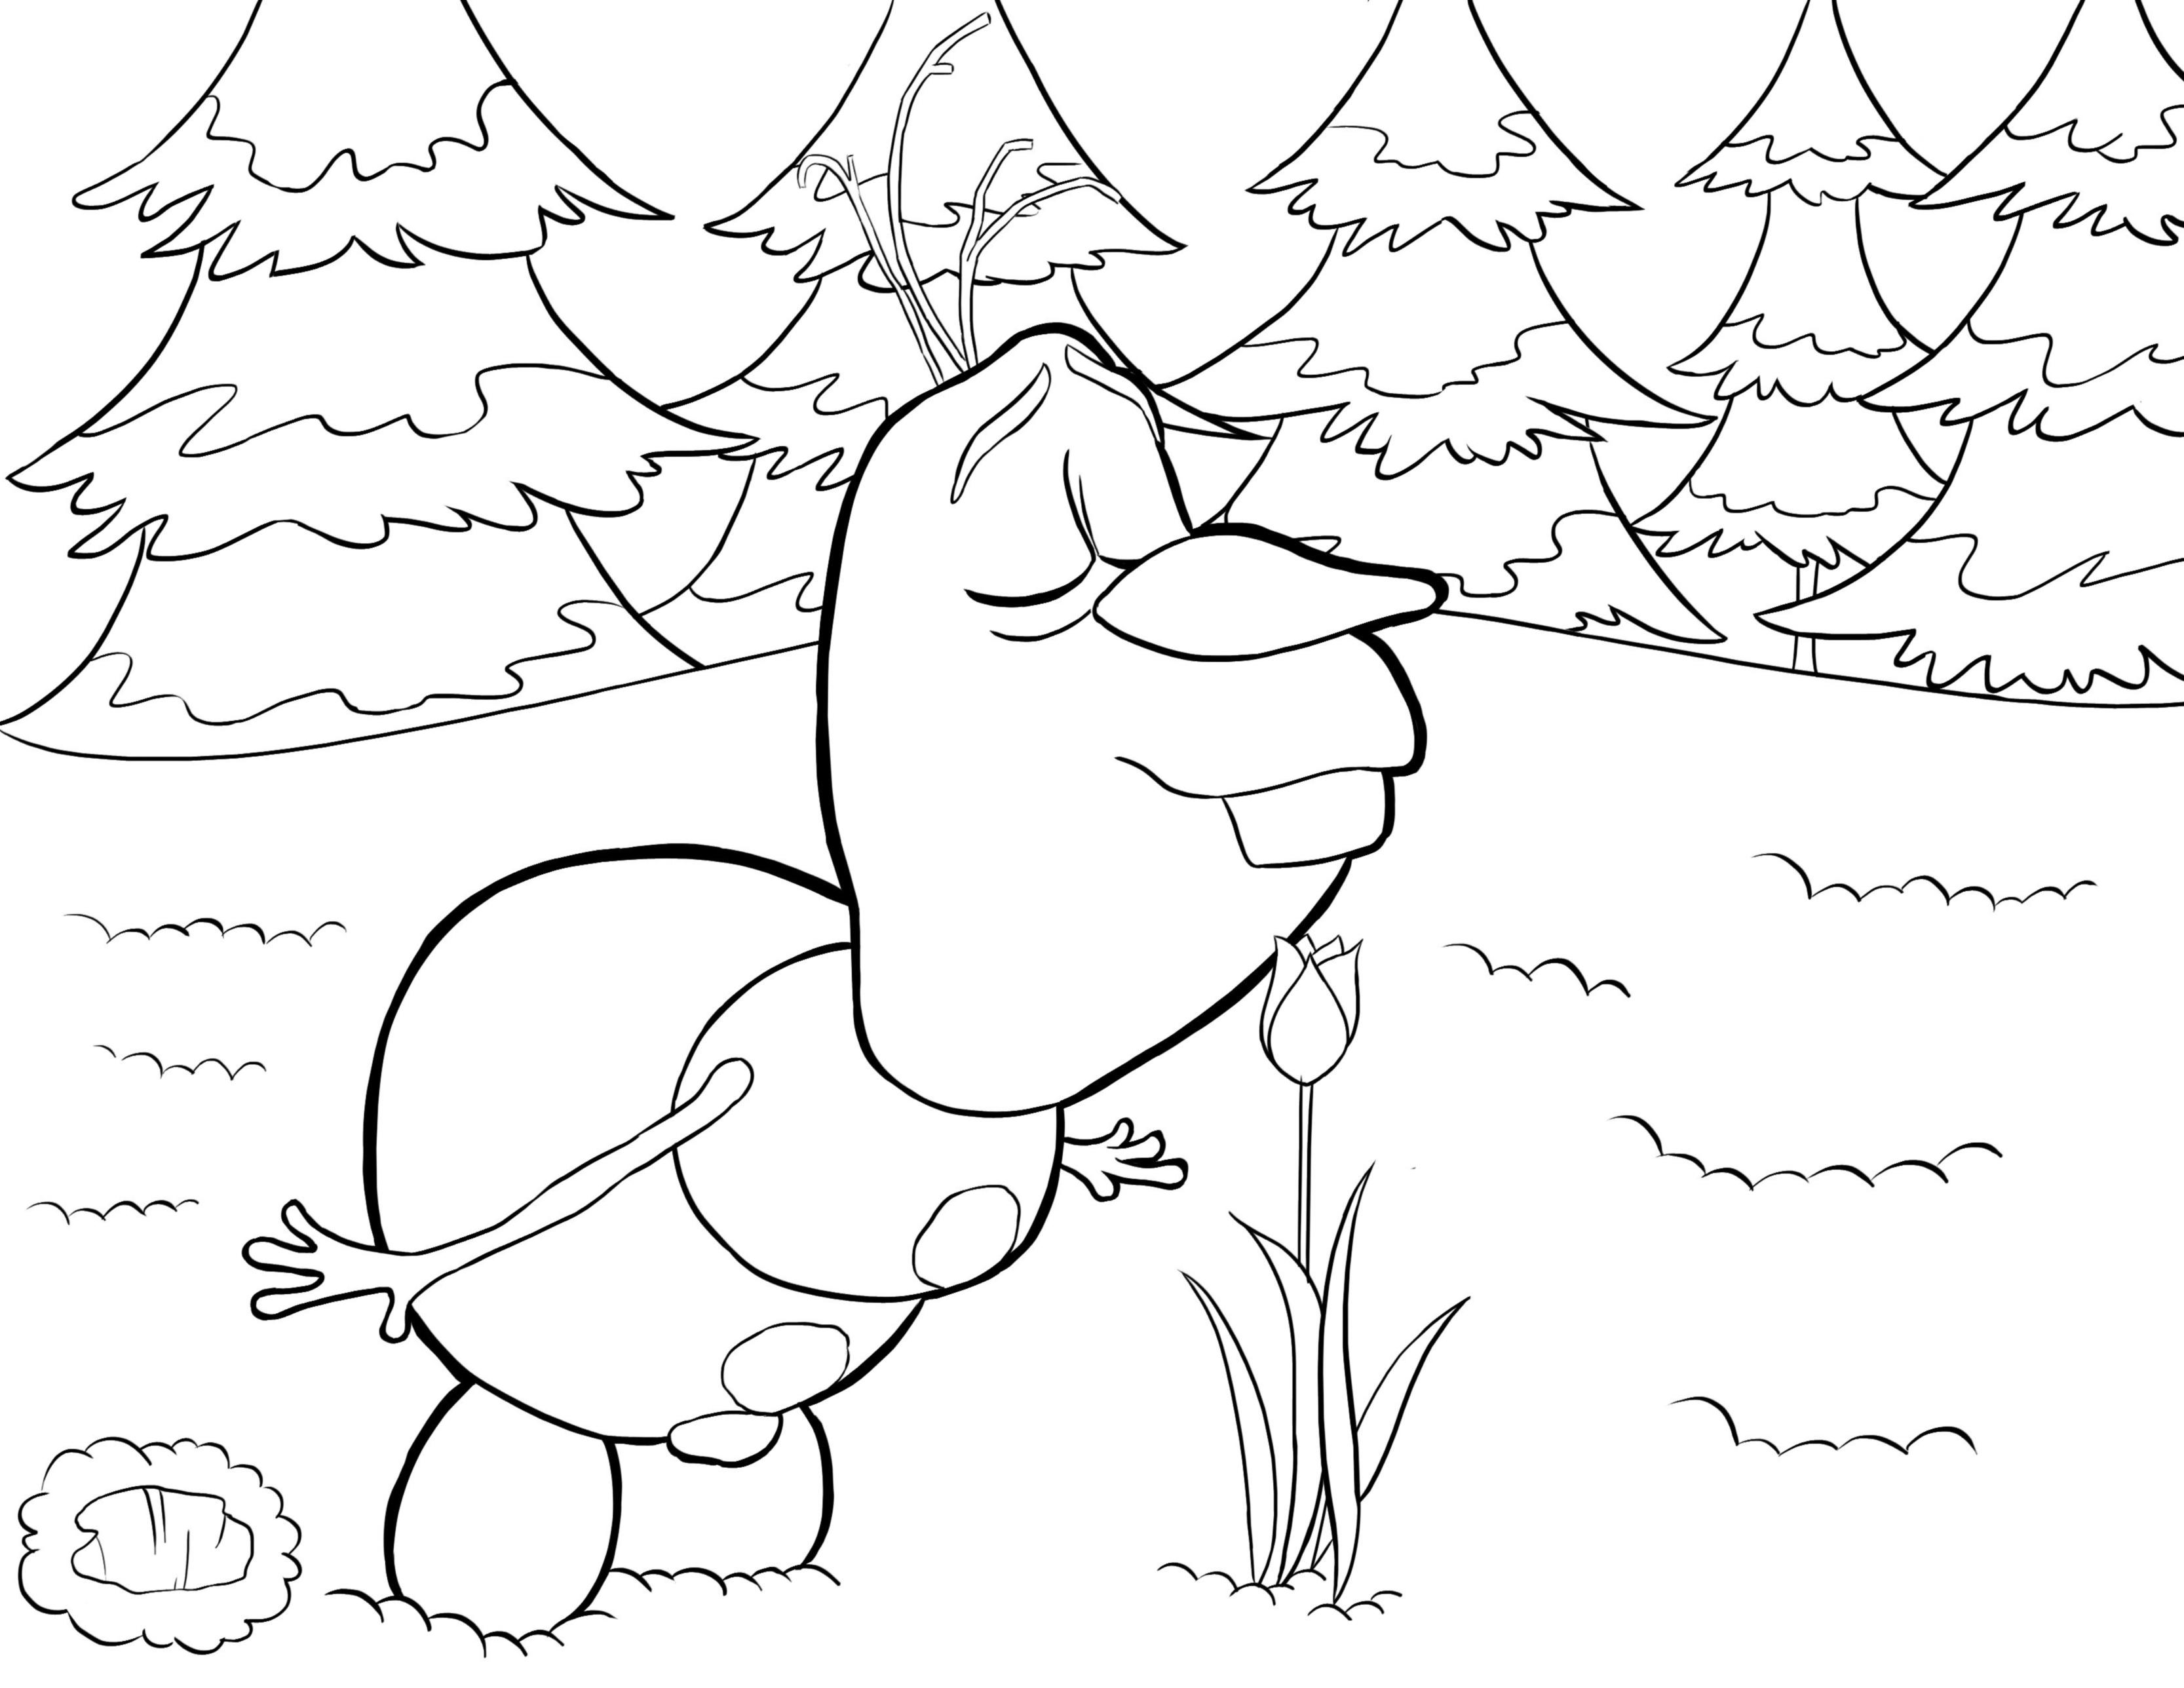  Frozen Coloring Pages | Color pages | FREE coloring pages for kids |Printable coloring pages for kids| #54